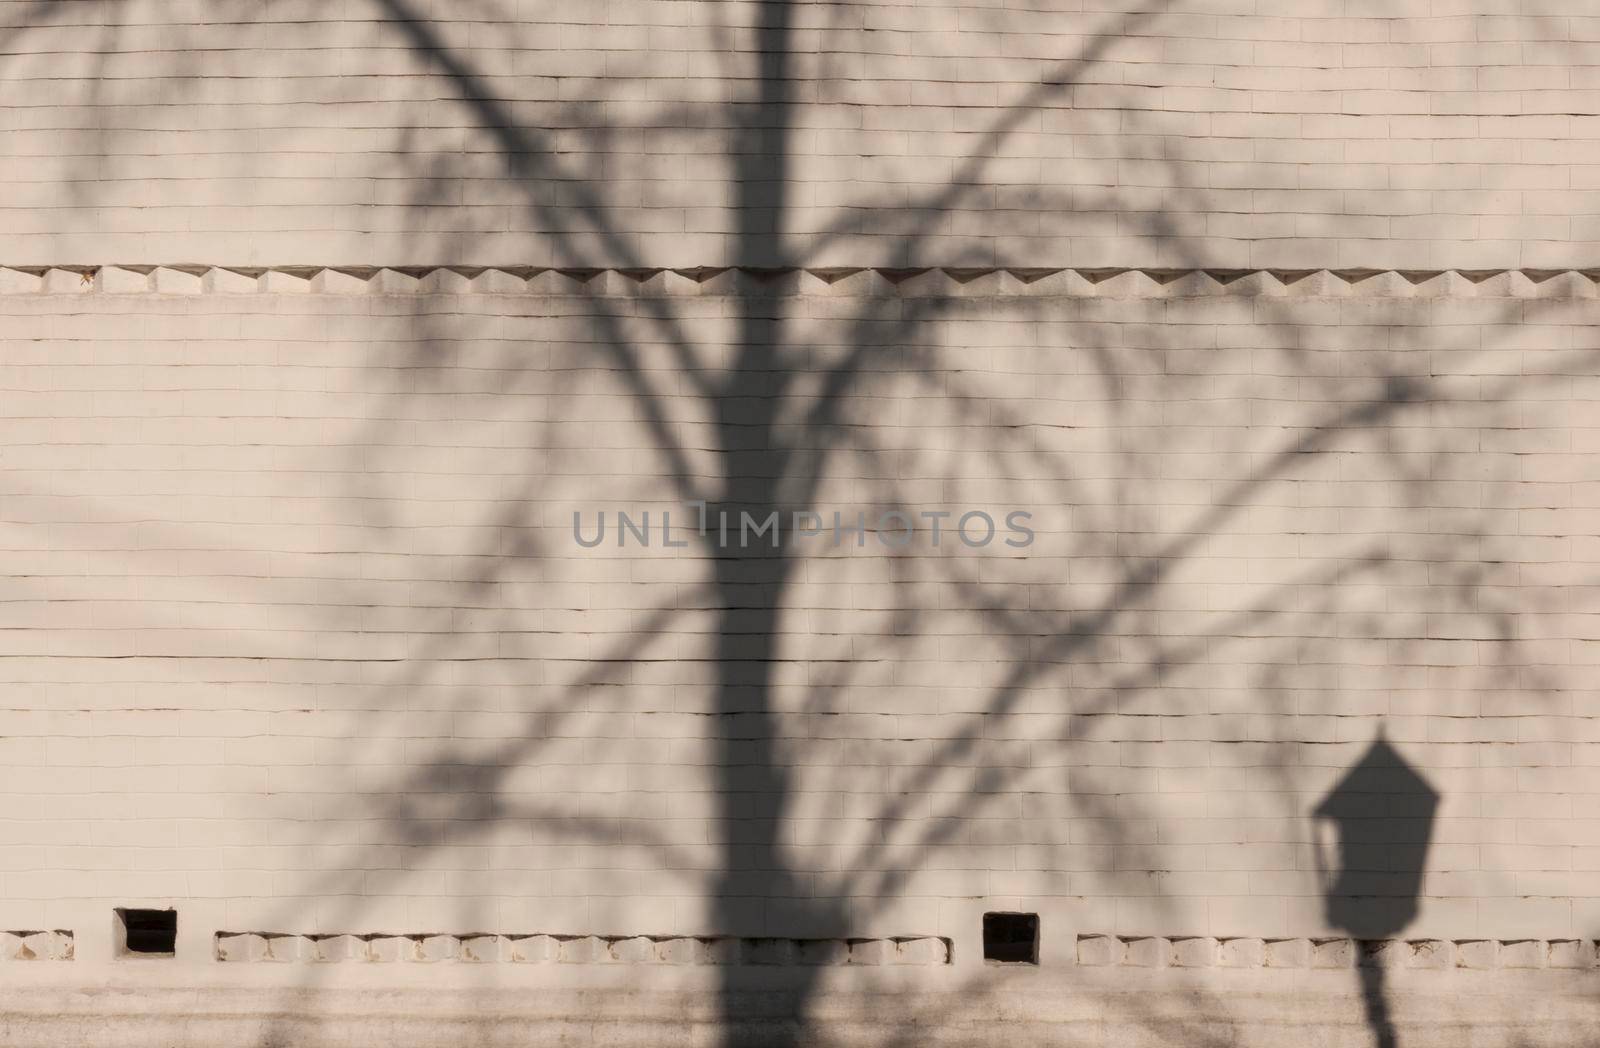 Lantern and tree shadows on the brick wall by inxti